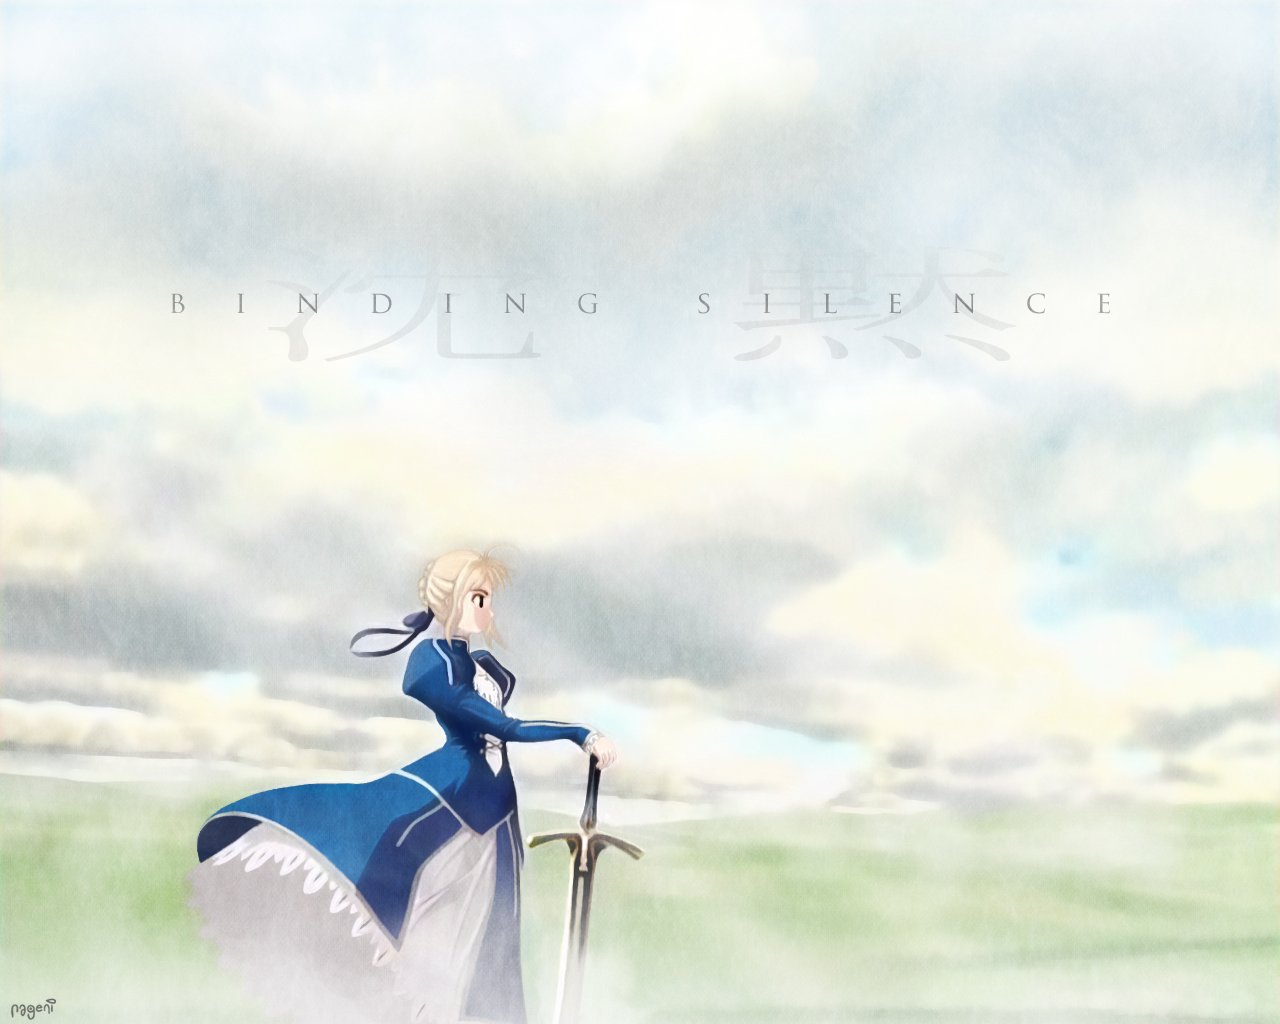 Saber (Fate Series) Anime Fate/Stay Night Image